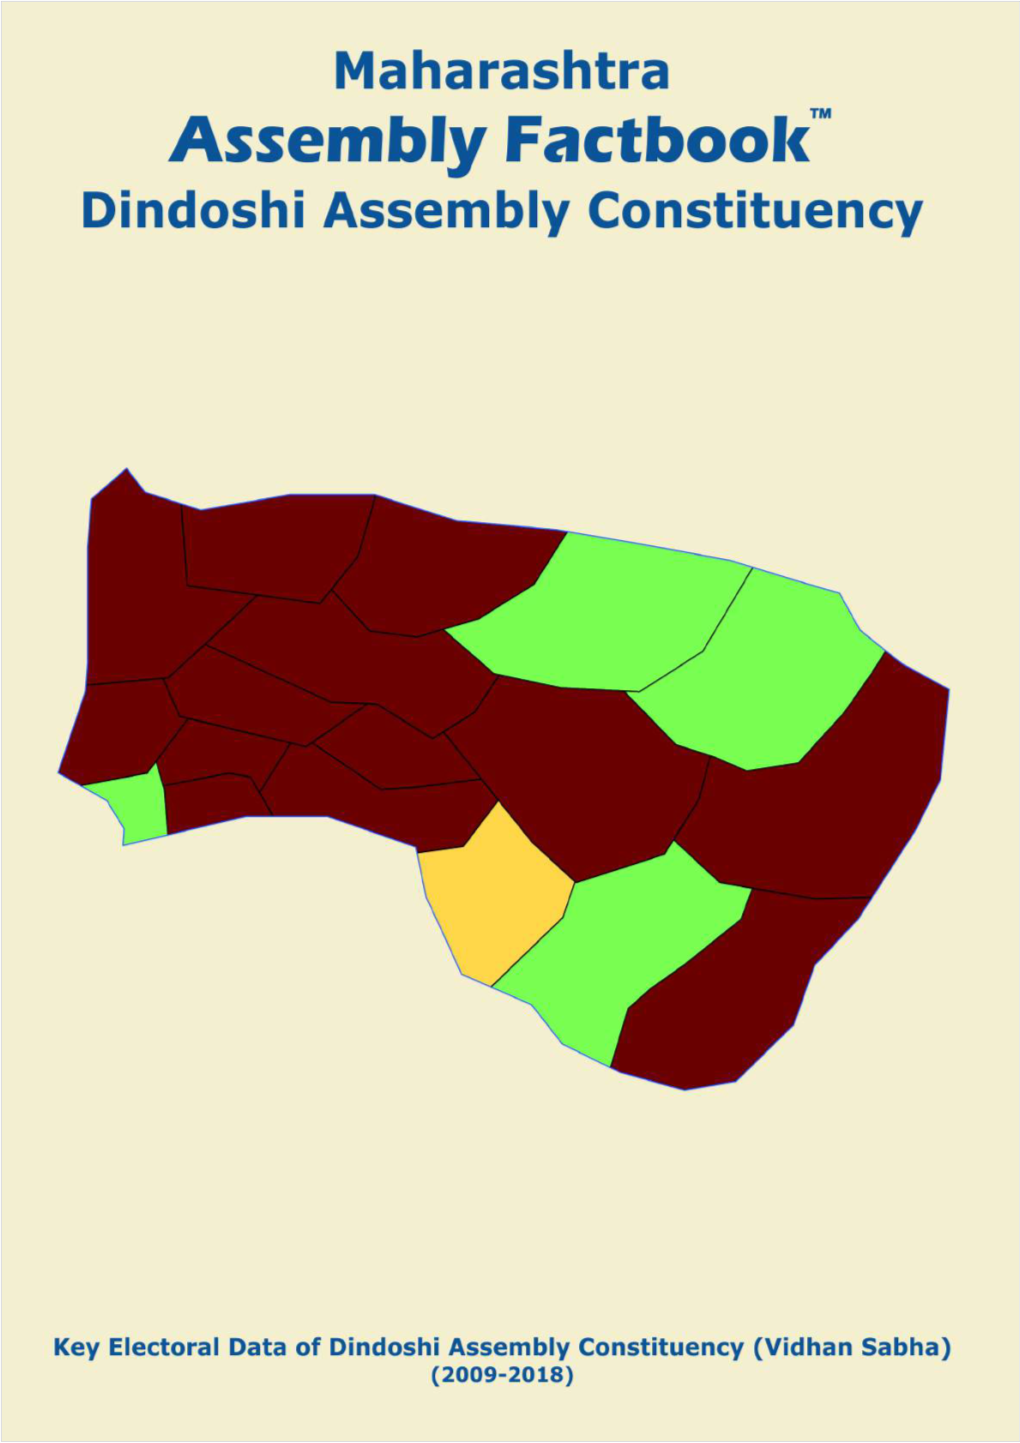 Key Electoral Data of Dindoshi Assembly Constituency